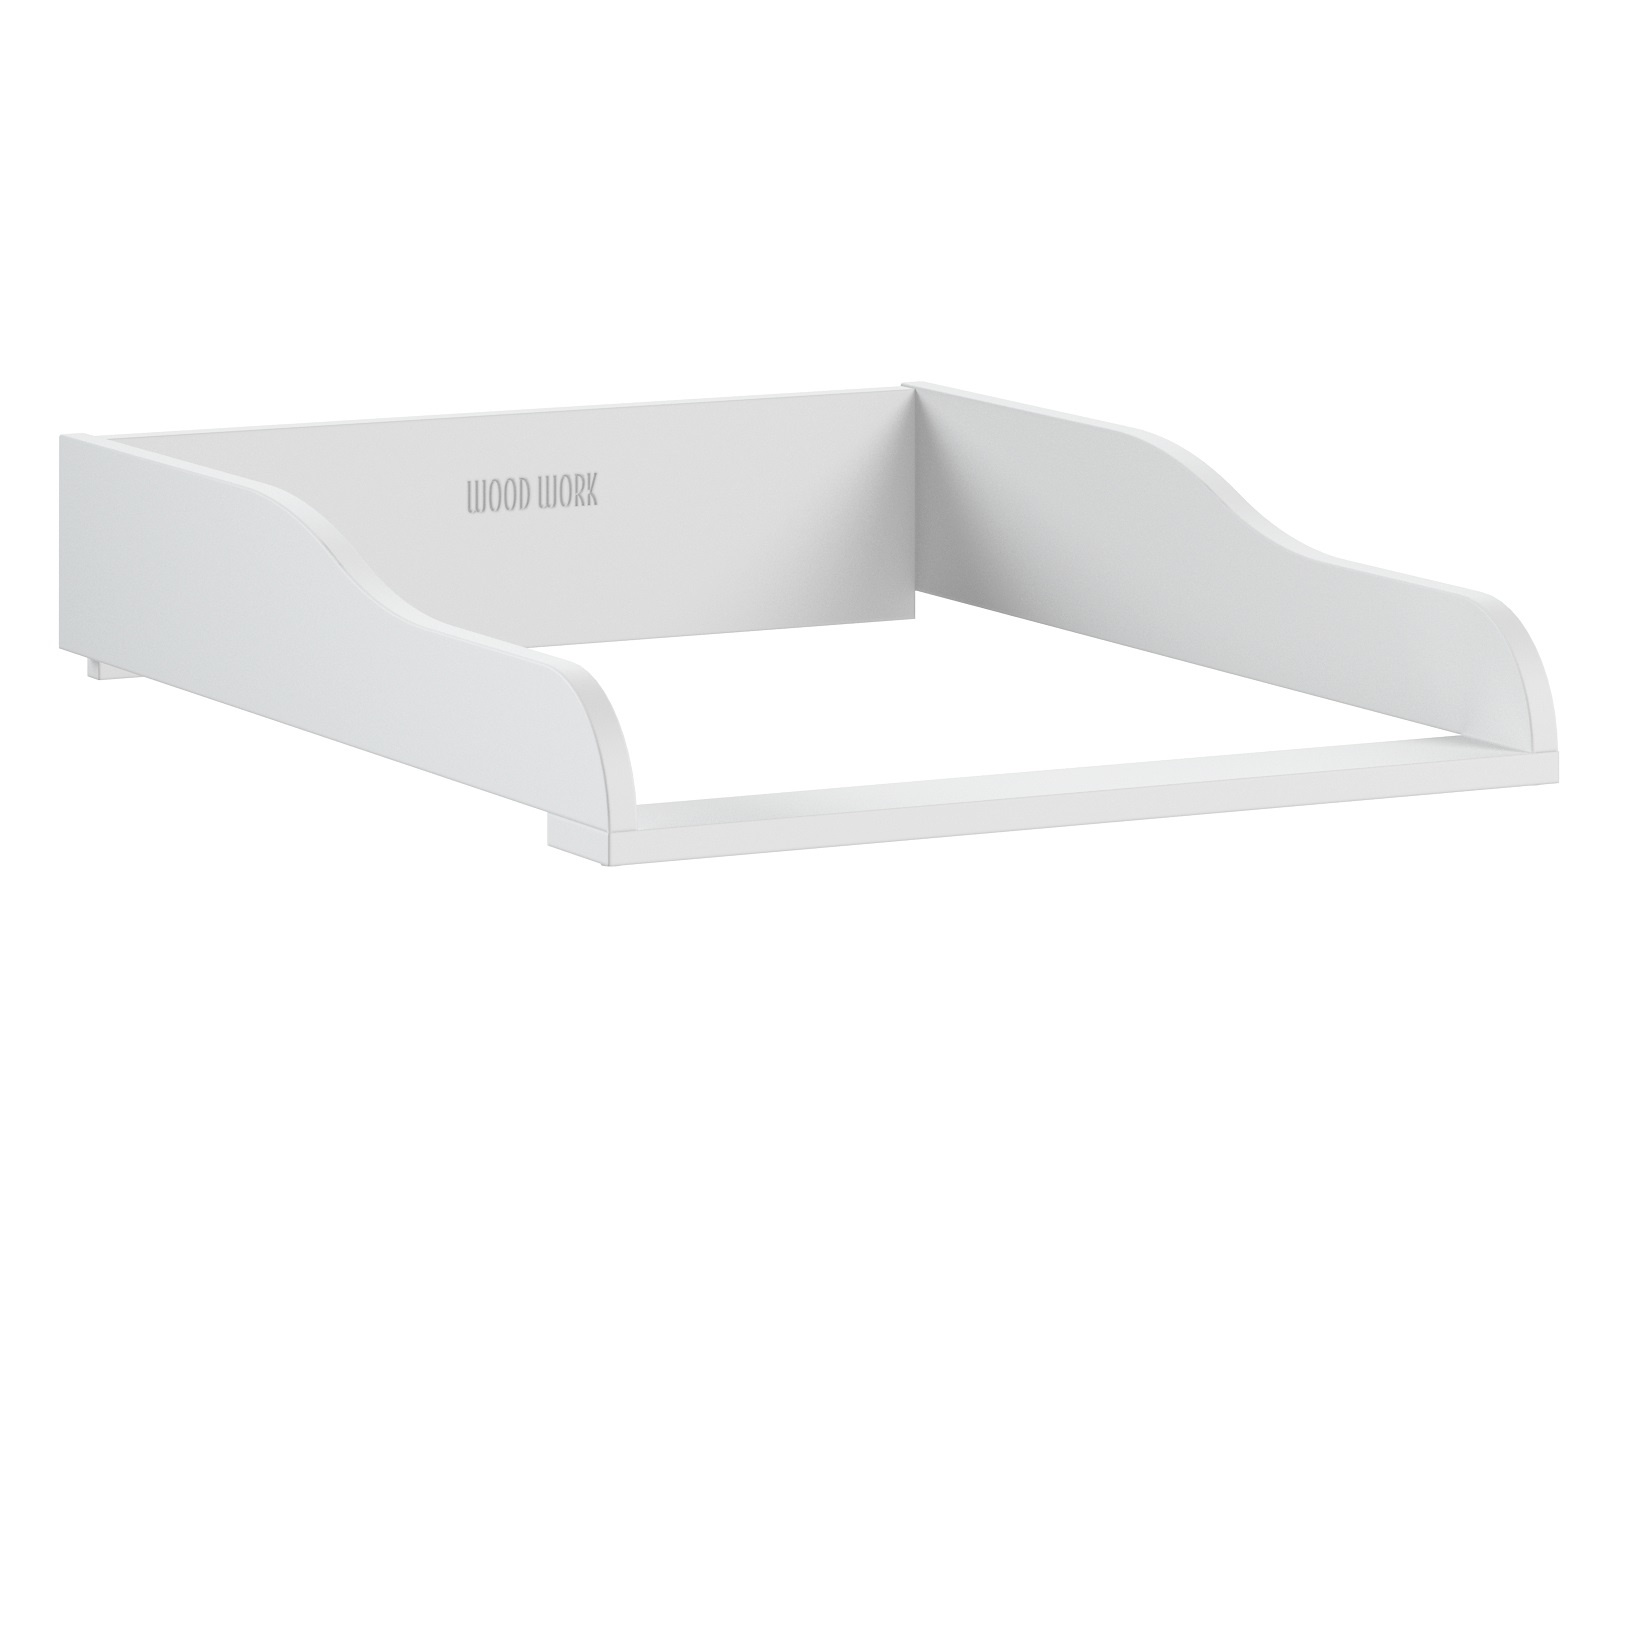 Bobby Changer Tray, Réhausse langer, Opzet voor commode -